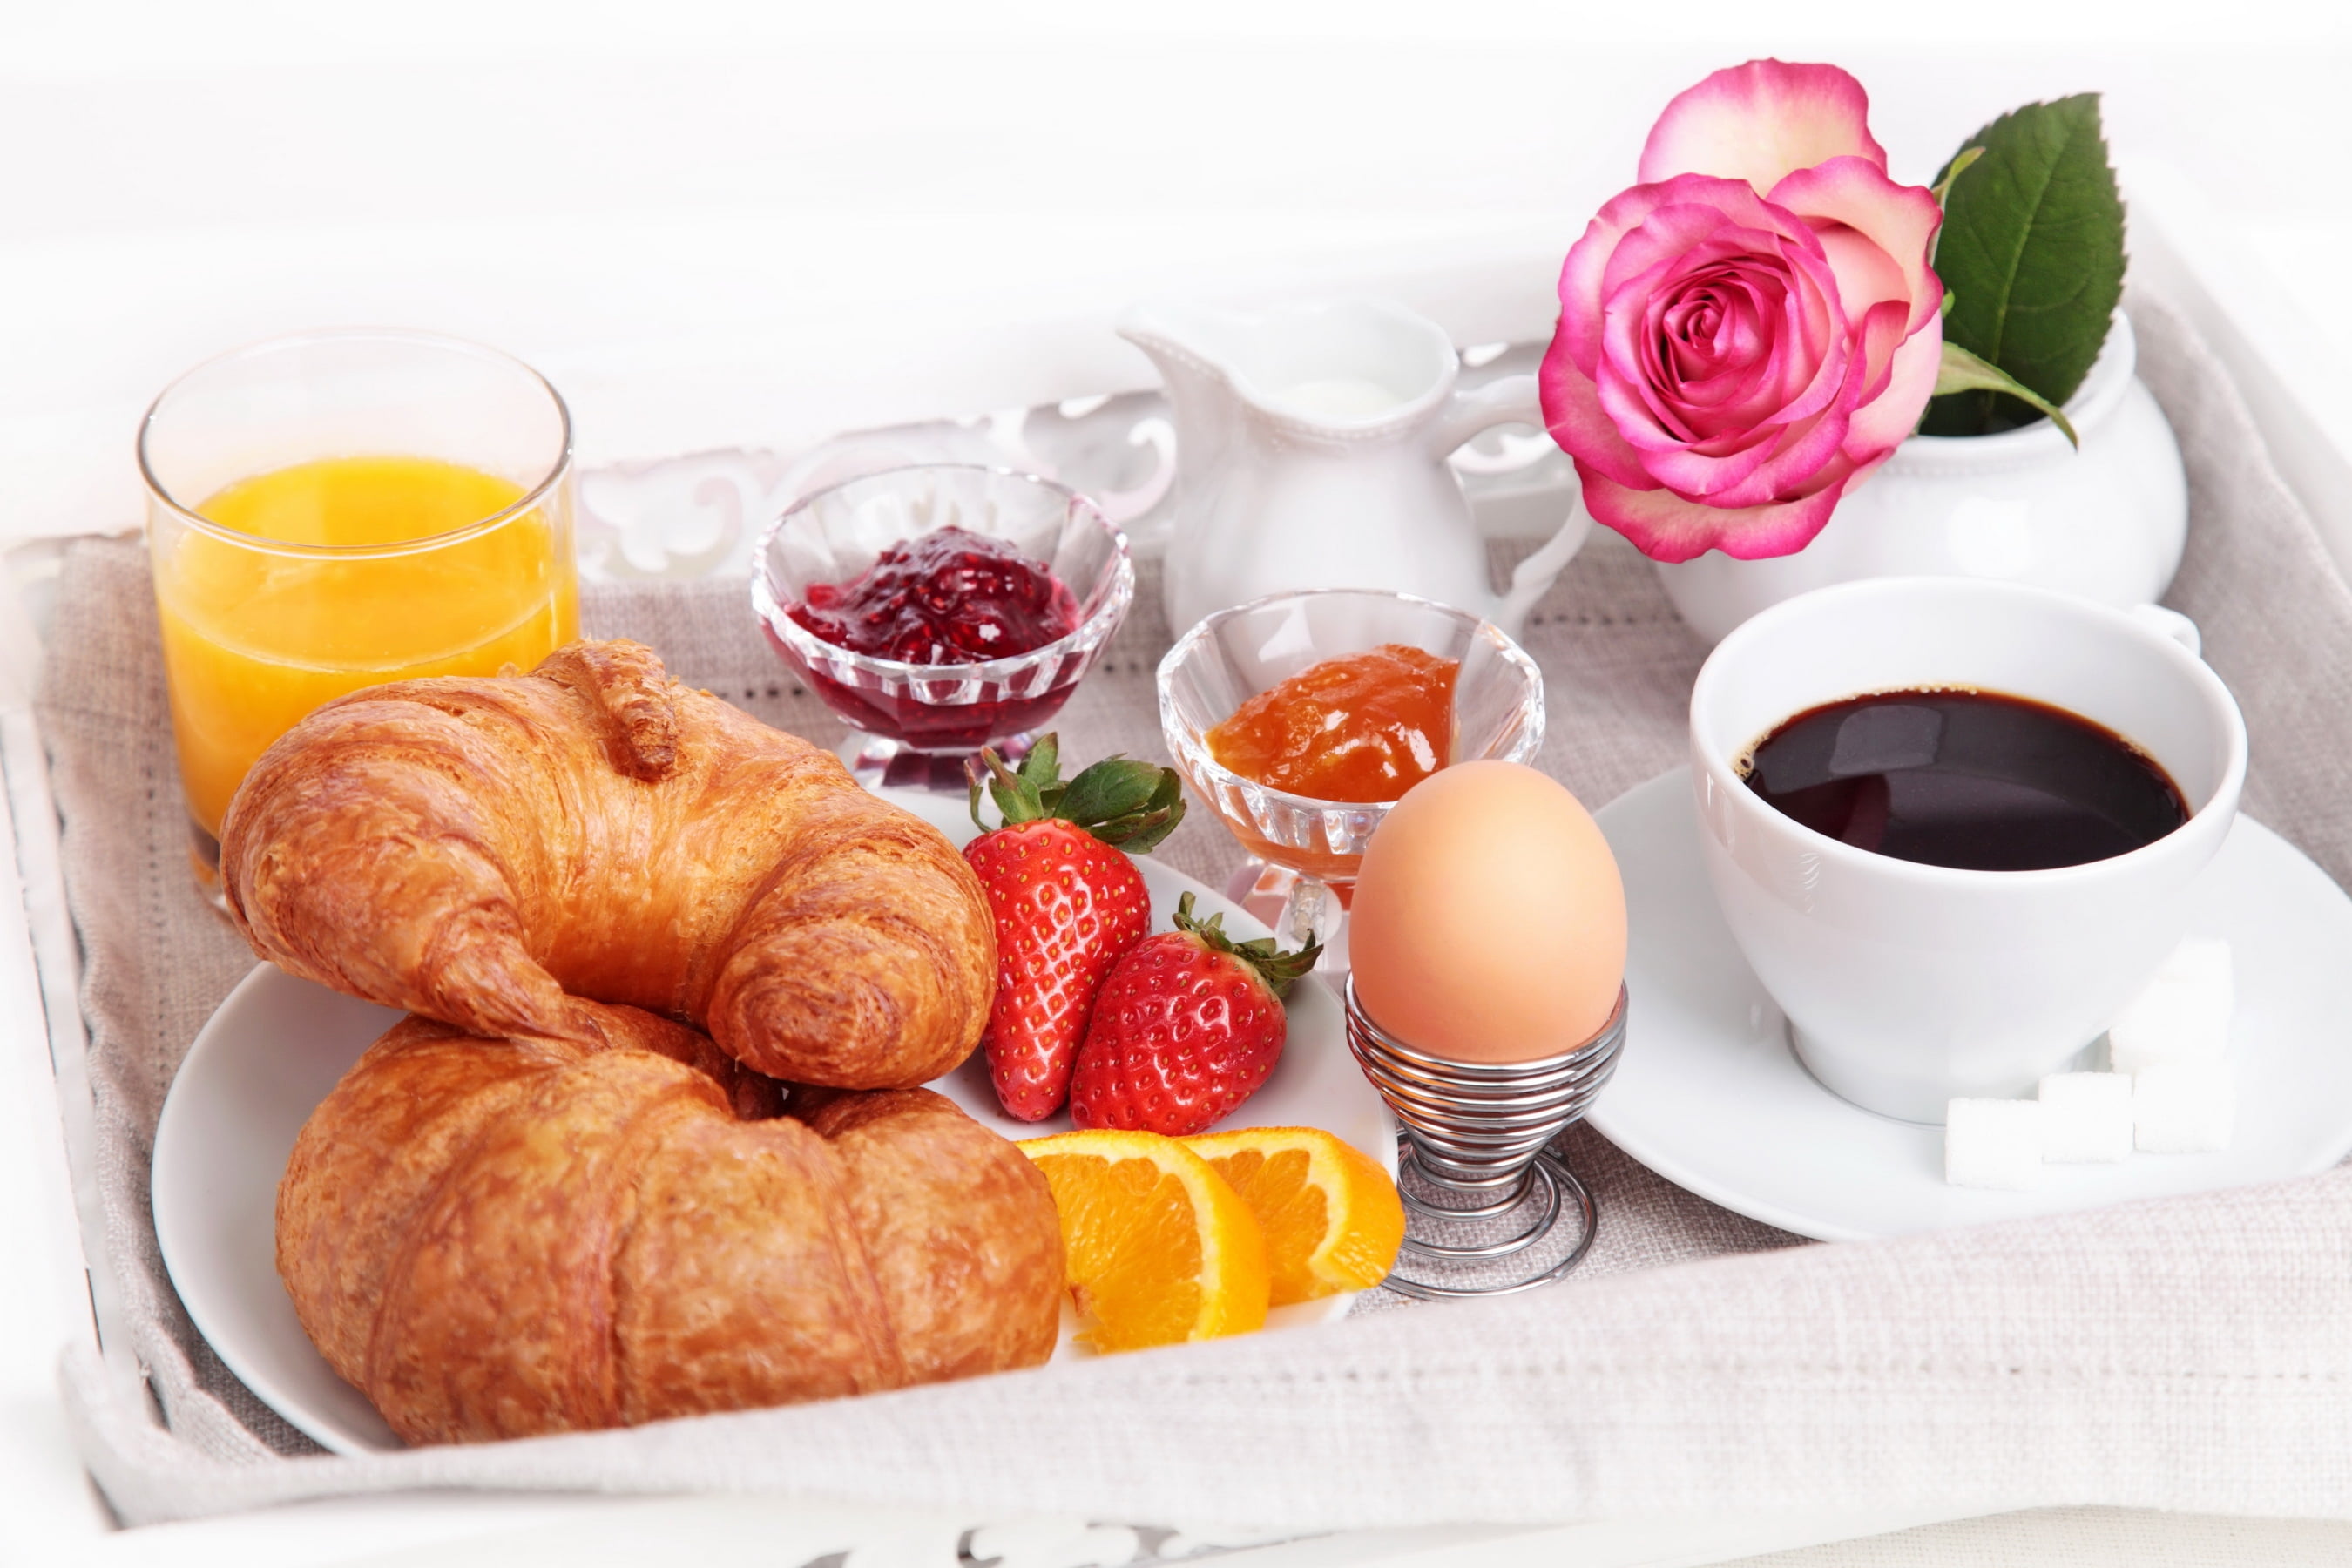 baked croissant and beige egg, breakfast, coffee, eggs, croissants